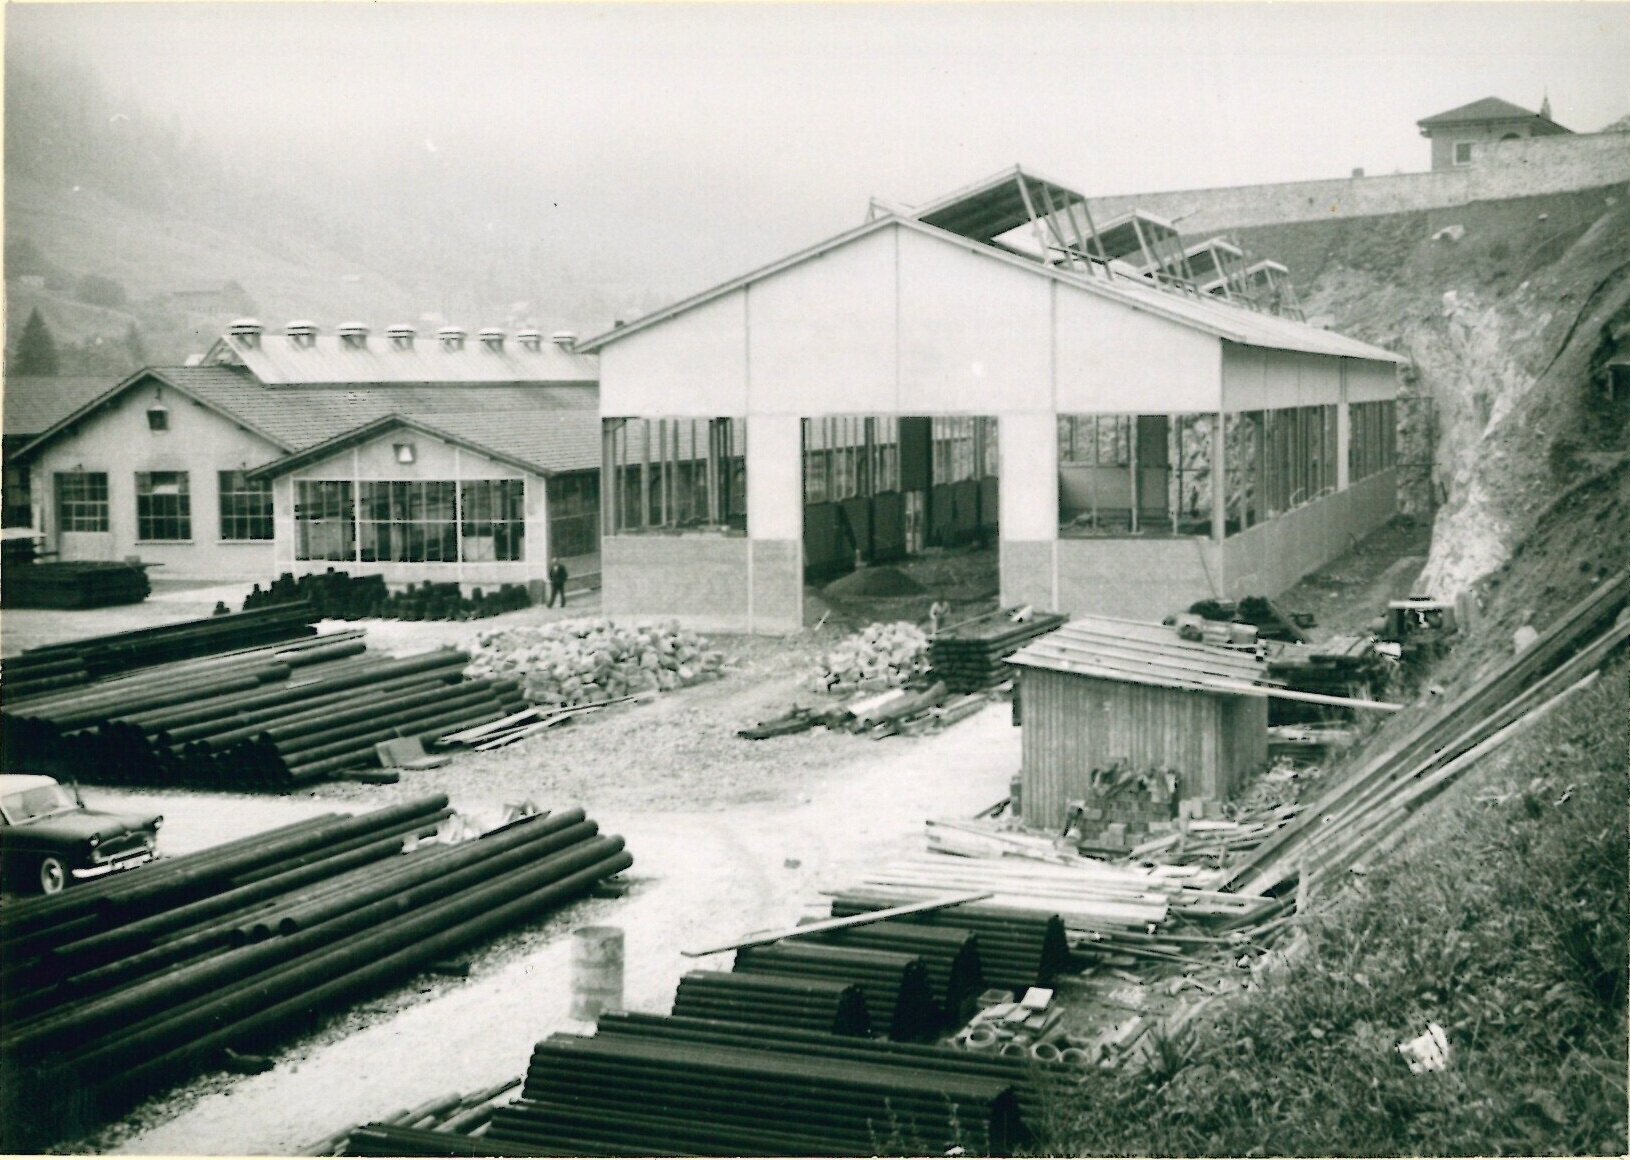 The new production facilities built in Airolo in the 1950s